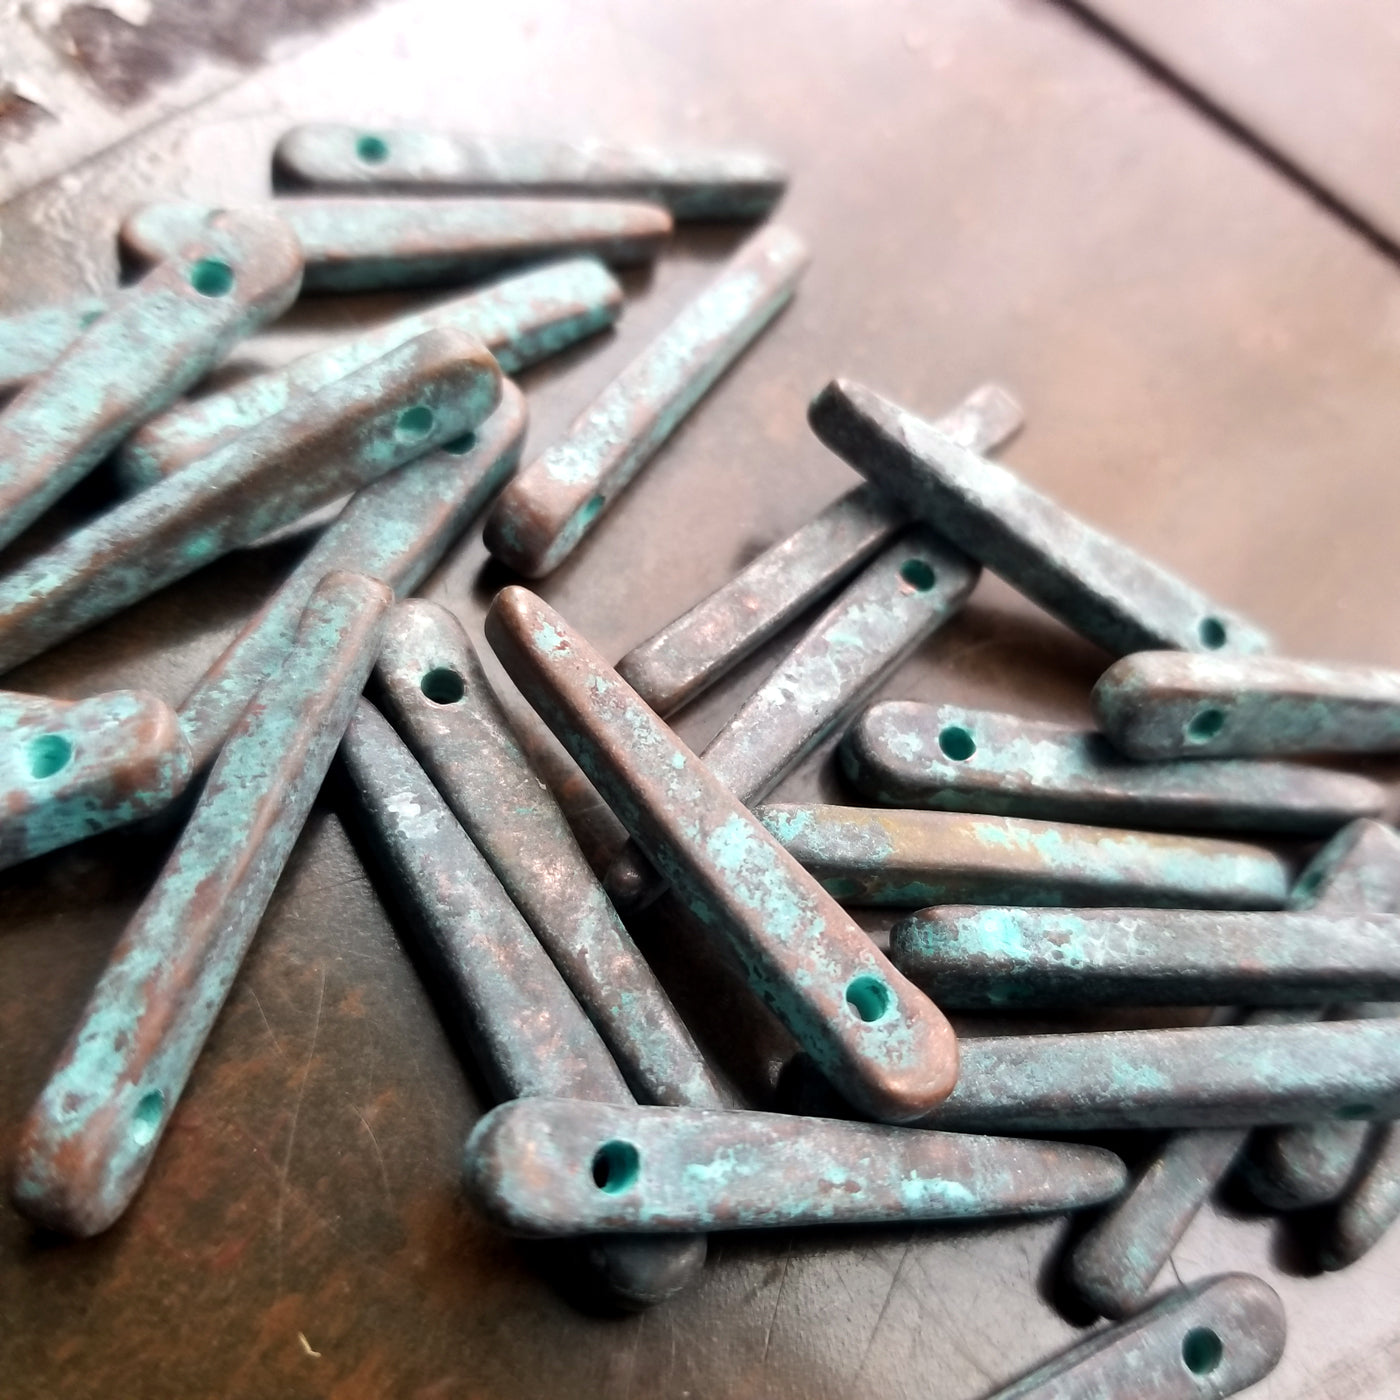 Spike Beads, 30mm x 5mm Mykonos Stick Beads, 4, 8 or 12 pieces, Verde Gris Green Rustic Patina Daggers, Bronze/Copper Jewelry Making Supply